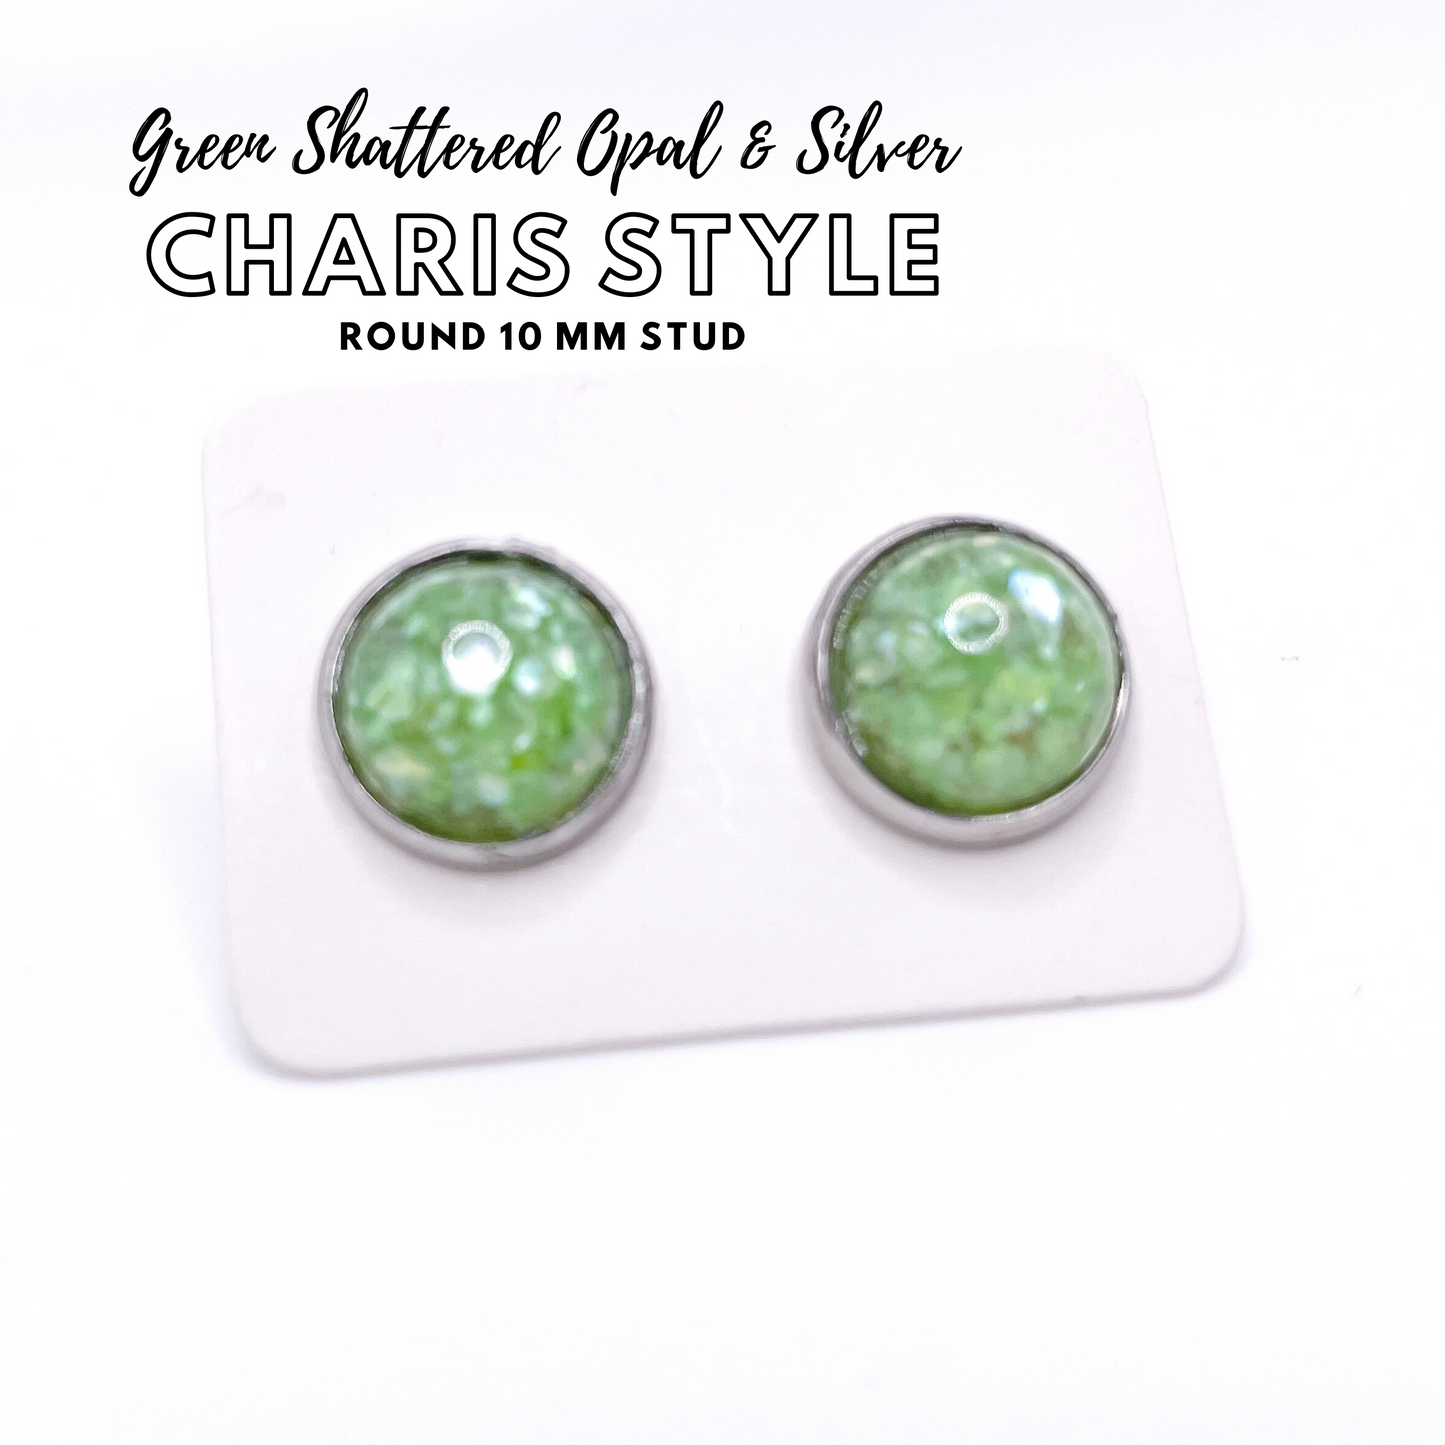 Charis Style - 10 MM Studs - Green Shattered Opal with Silver